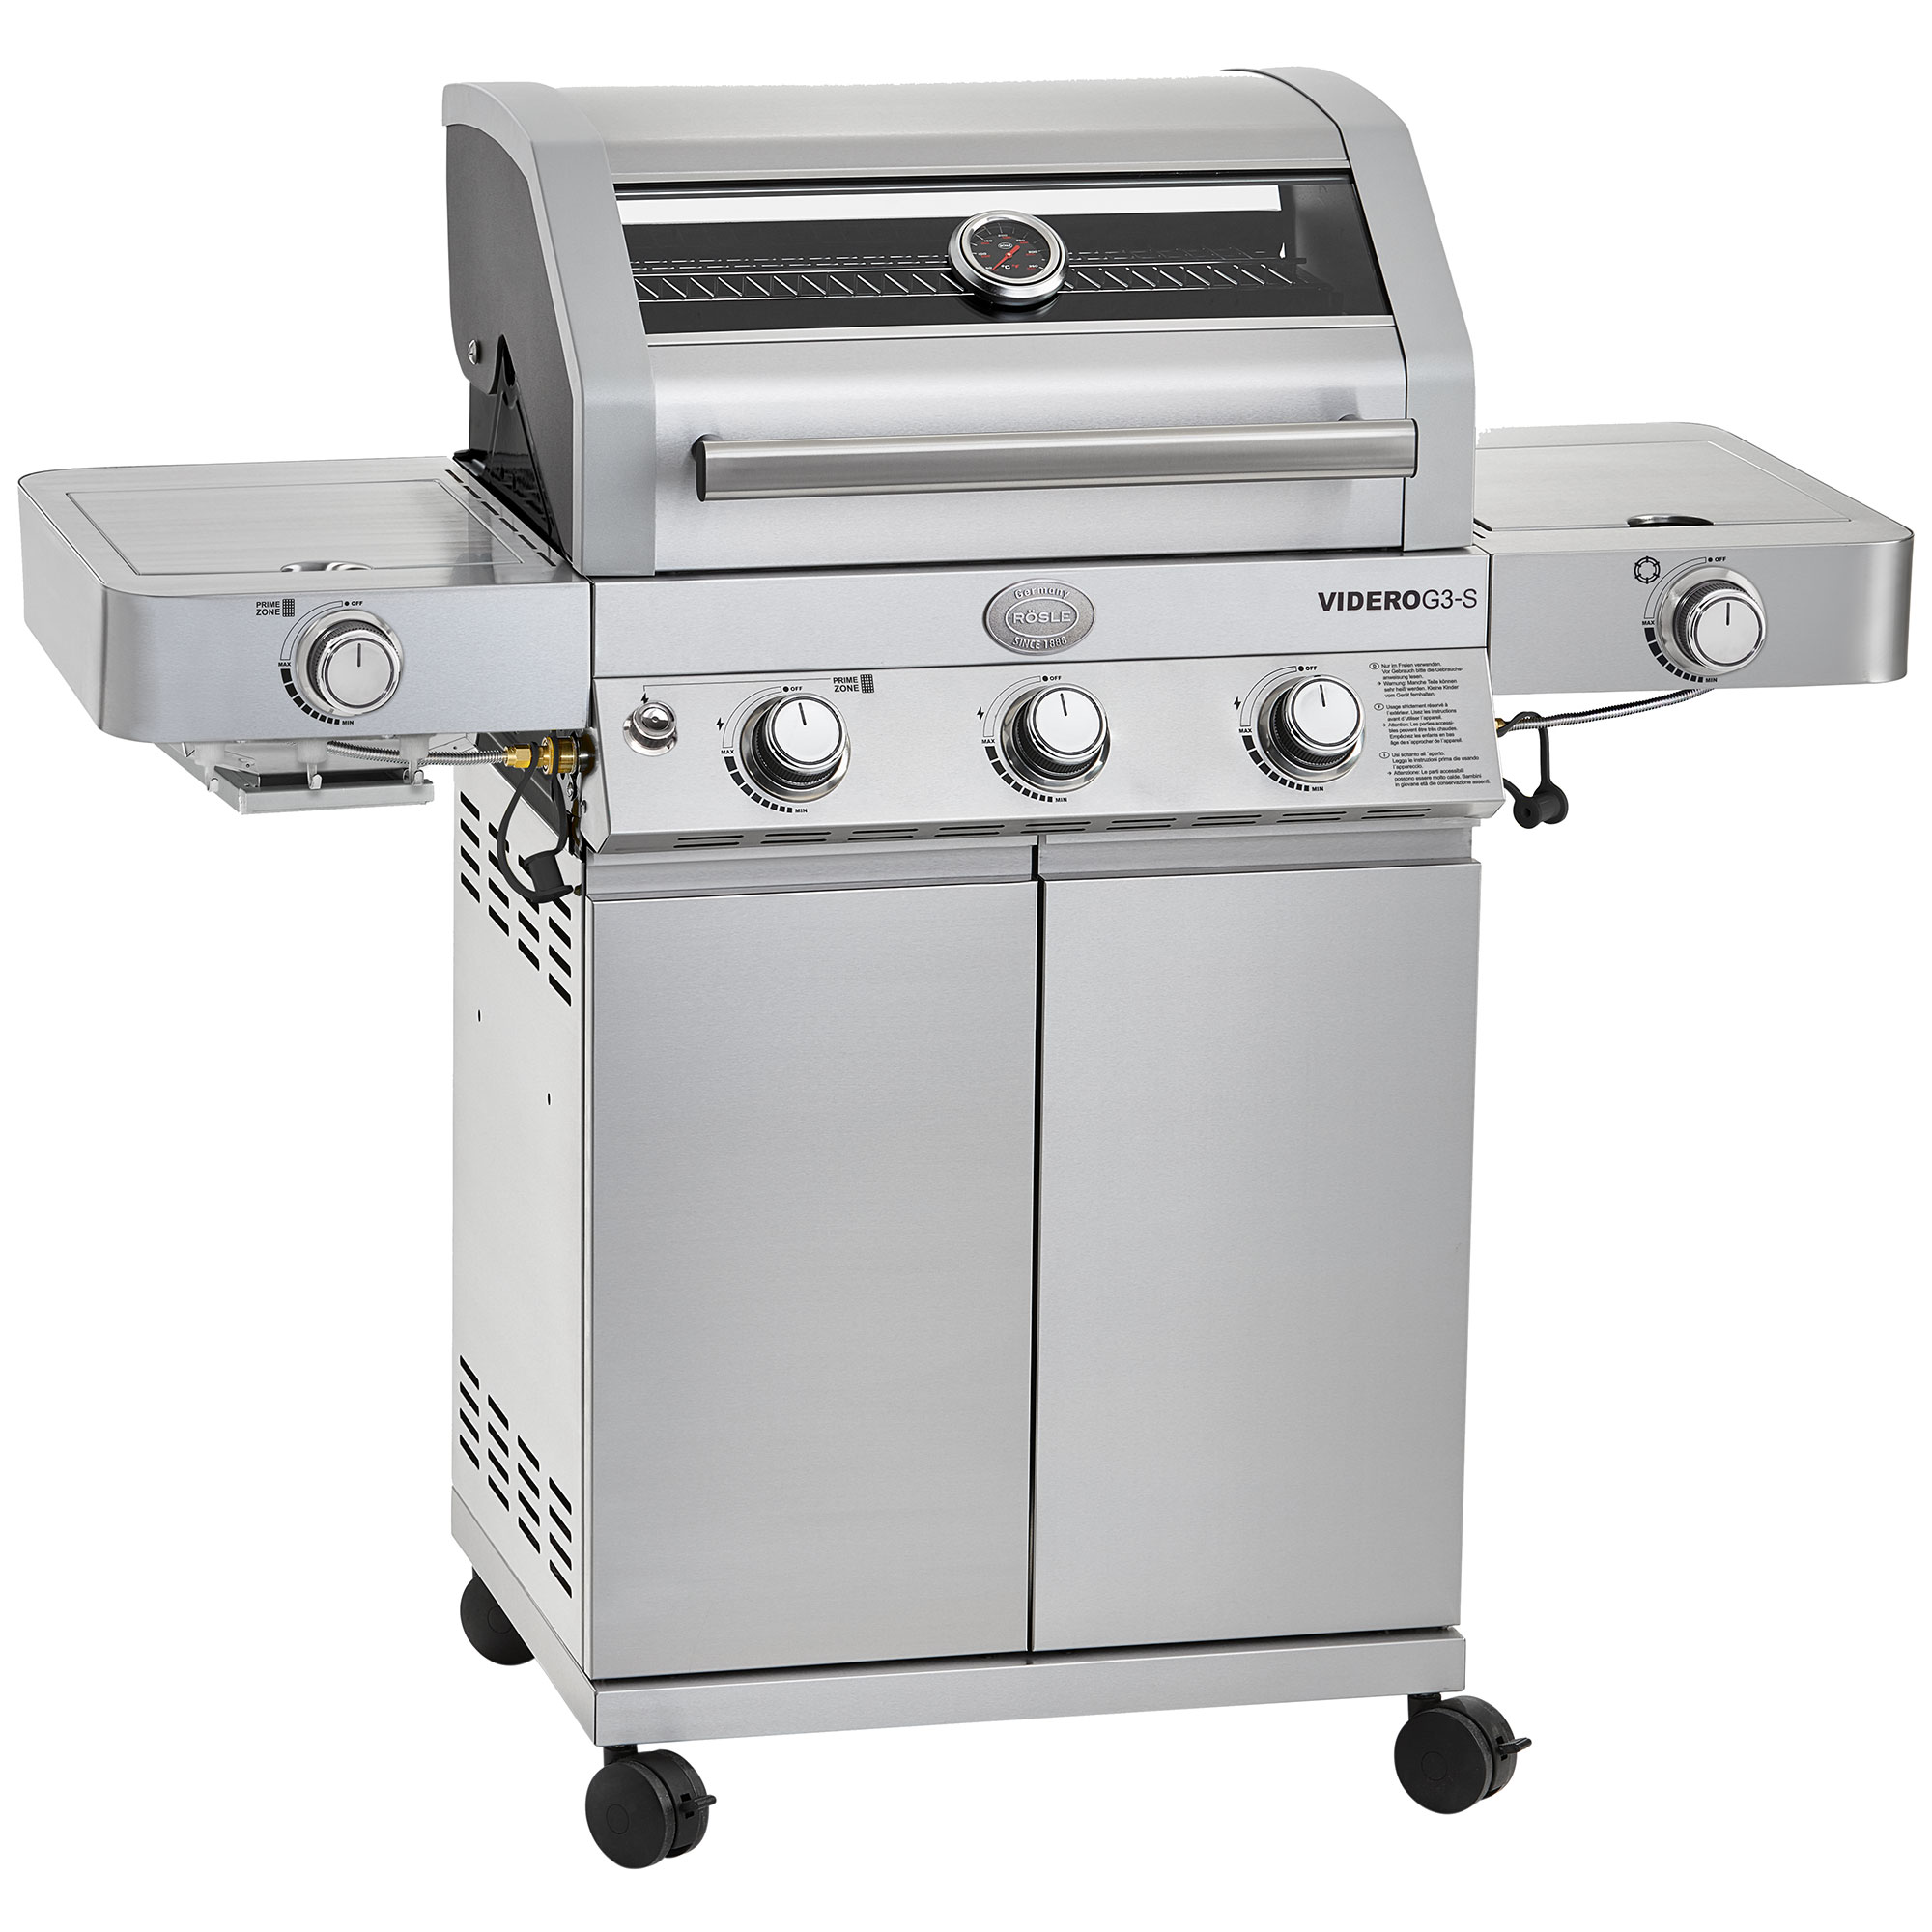 Gas grill BBQ-Station VIDERO G3-S Vario+ Stainless Steel 50 mbar, Exclusive at Grillfürst